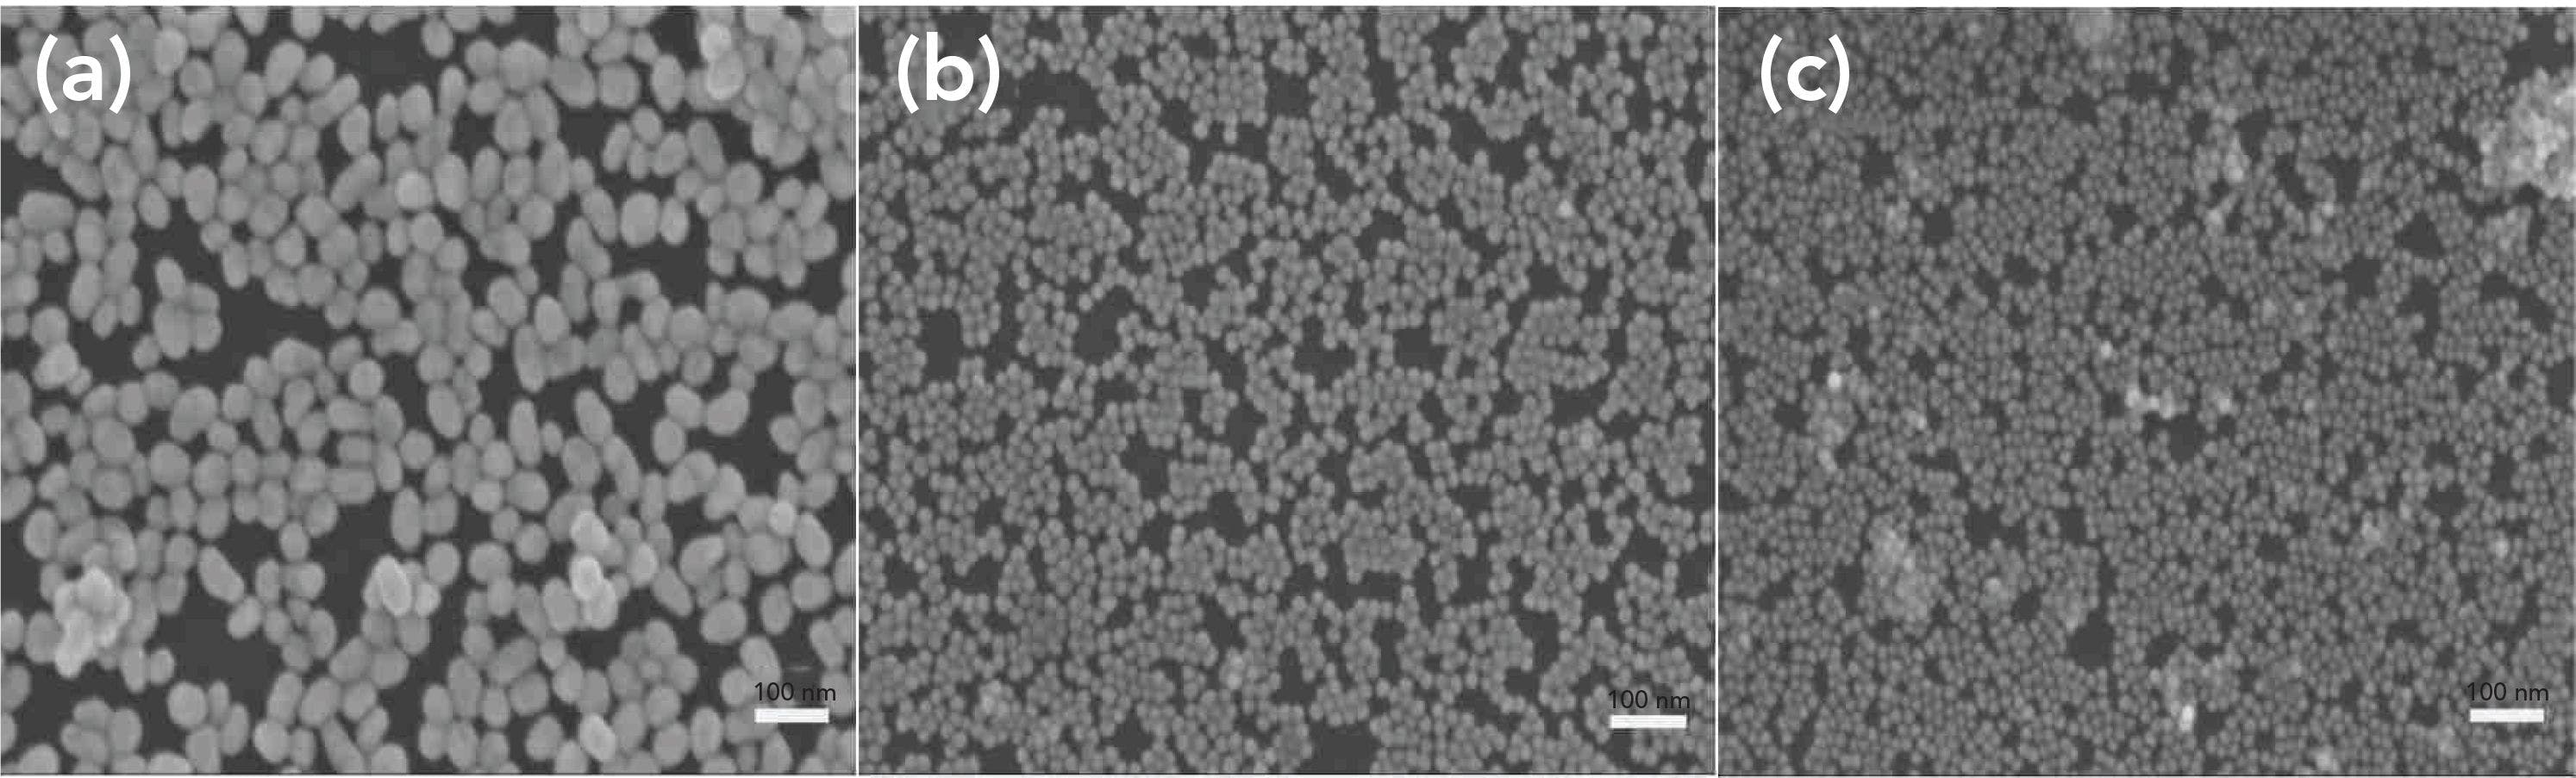 FIGURE 2: SEM images of gold nanoparticles with different particle sizes; (a) E1, (b) E2, (c) E3.